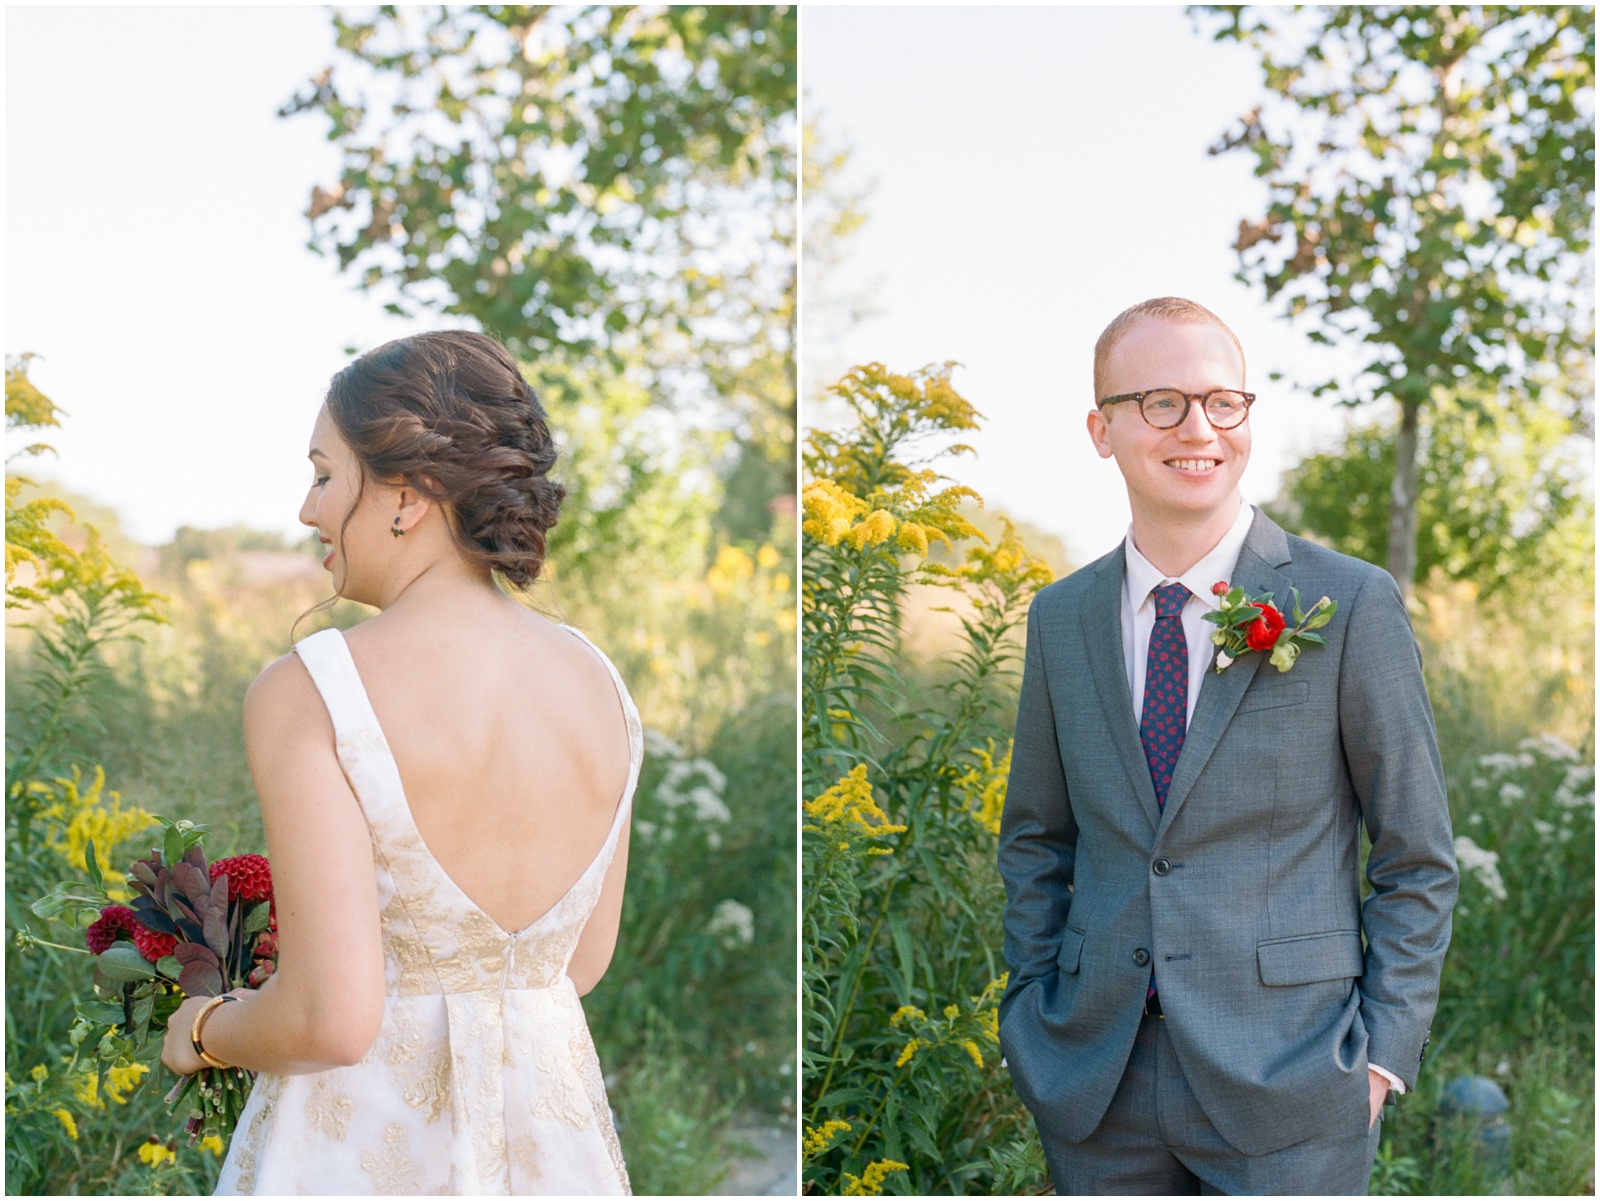 weekday elopement Lincoln Park